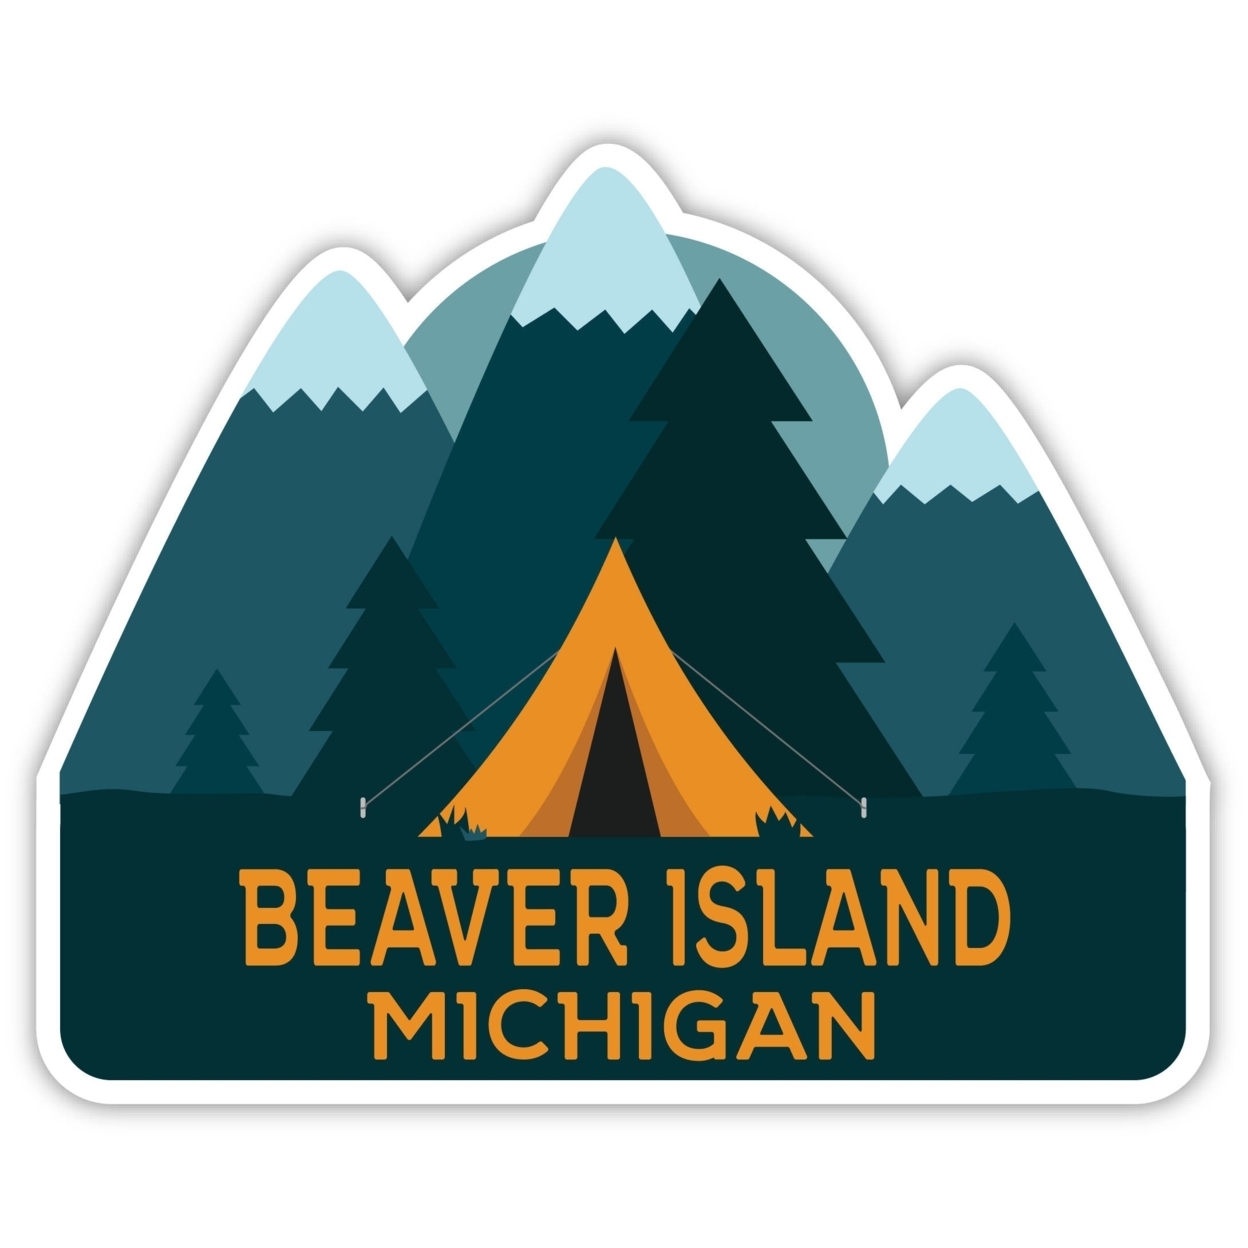 Beaver Island Michigan Souvenir Decorative Stickers (Choose Theme And Size) - 4-Pack, 10-Inch, Tent